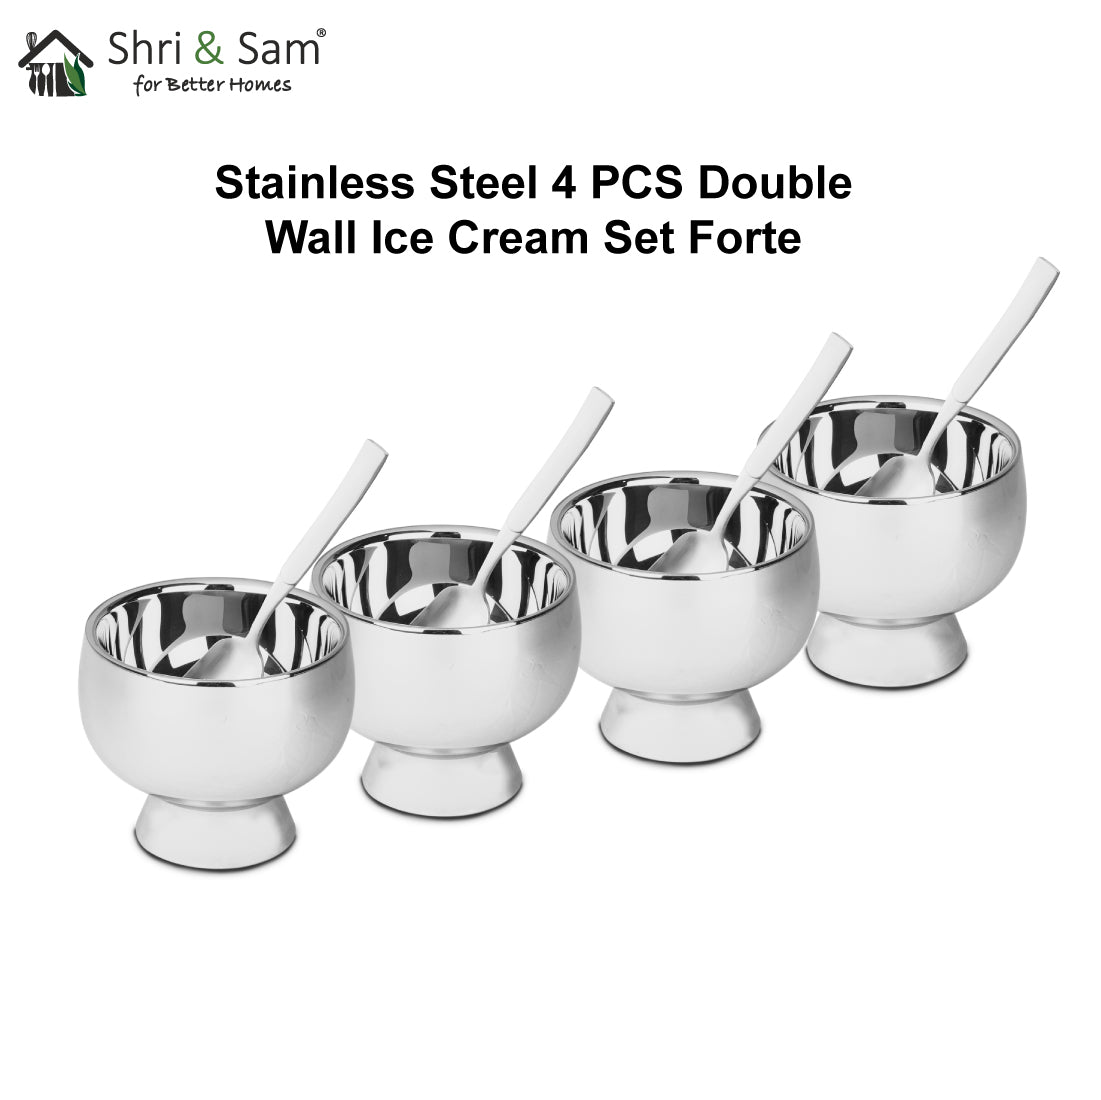 Stainless Steel 4 PCS Double Wall Ice Cream Set Forte